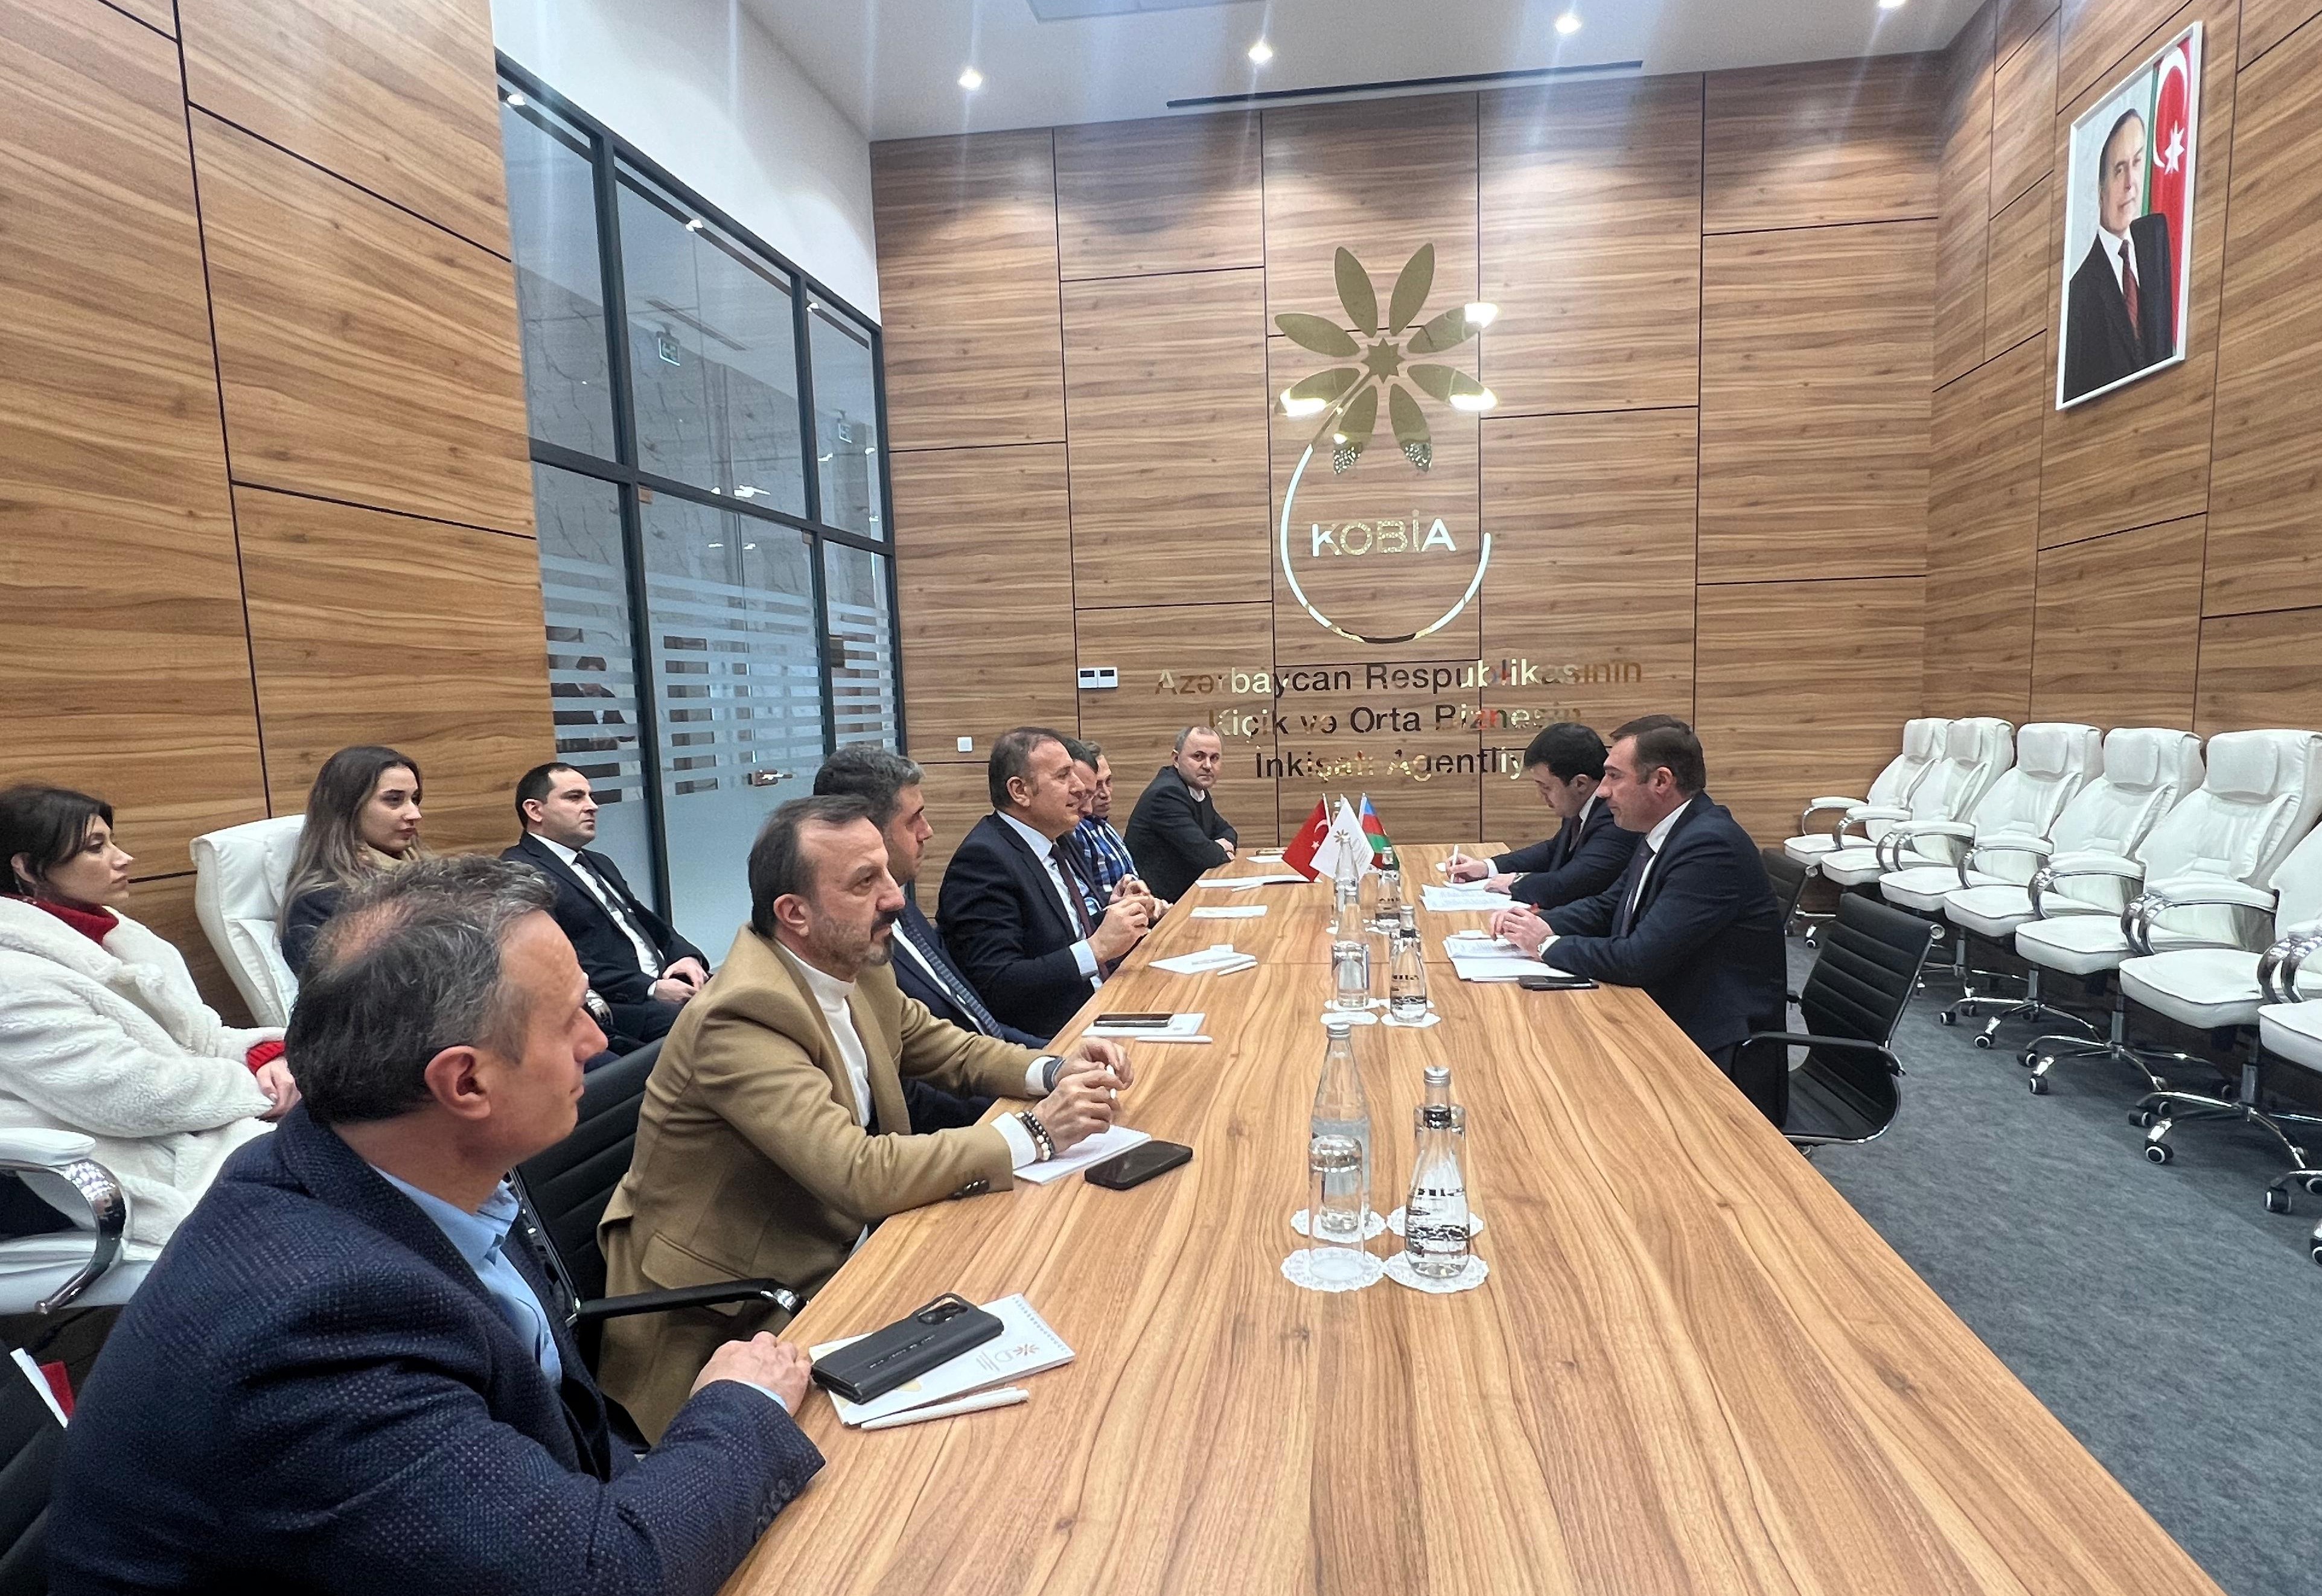 Meeting between KOBİA and Trabzon Chamber of Commerce and Industry of Türkiye 